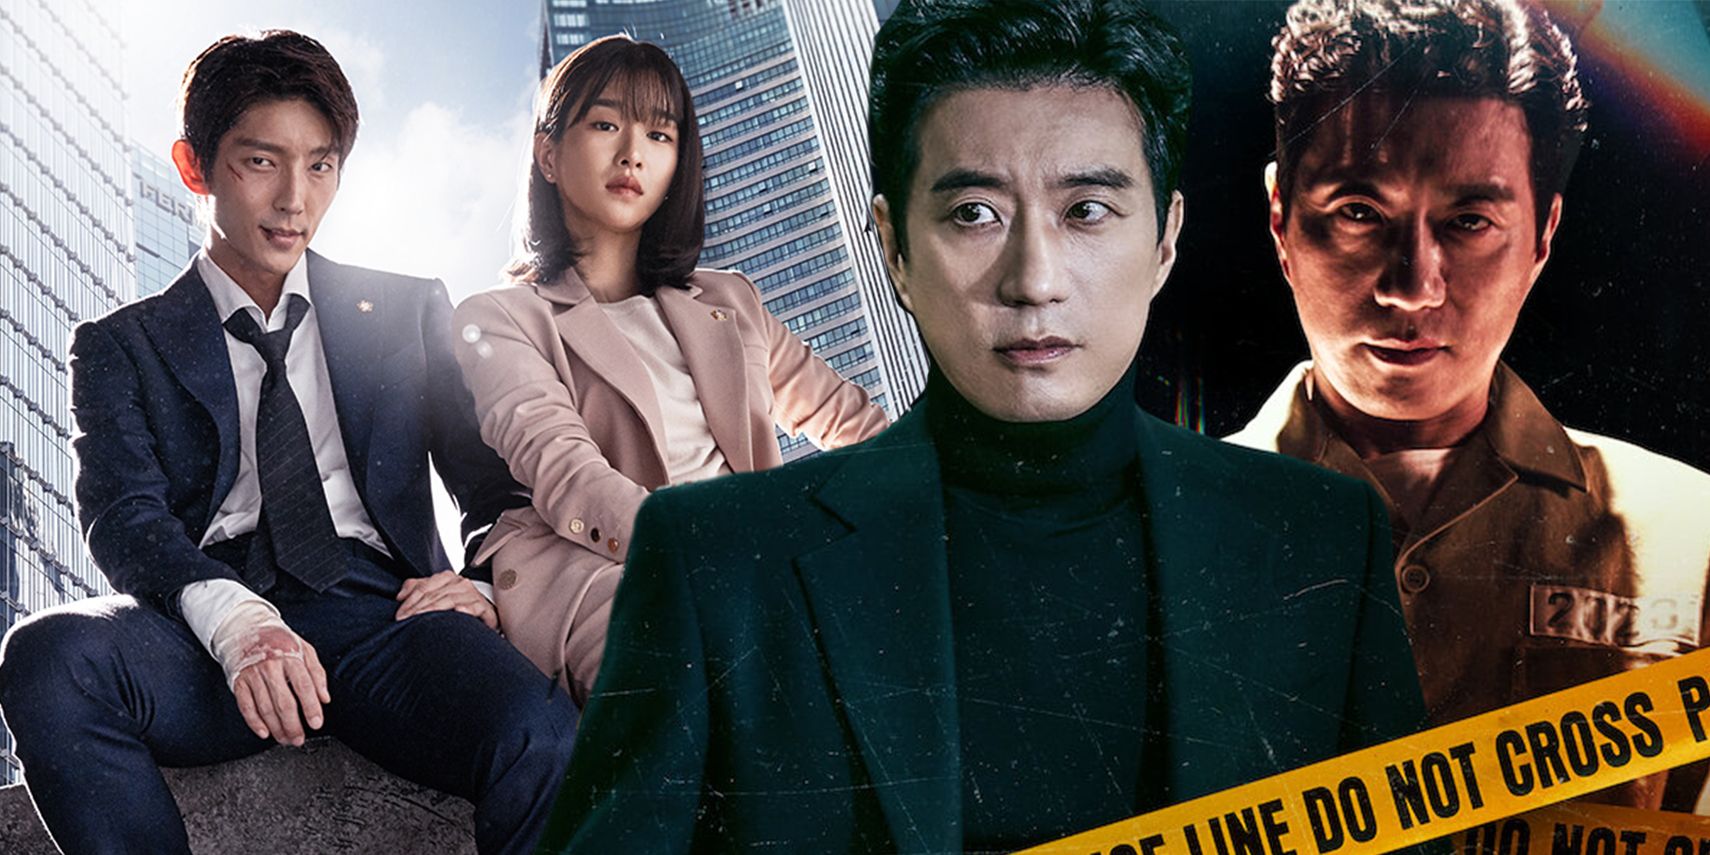 Lawless Lawyer promo poster and in Netflix's Law School